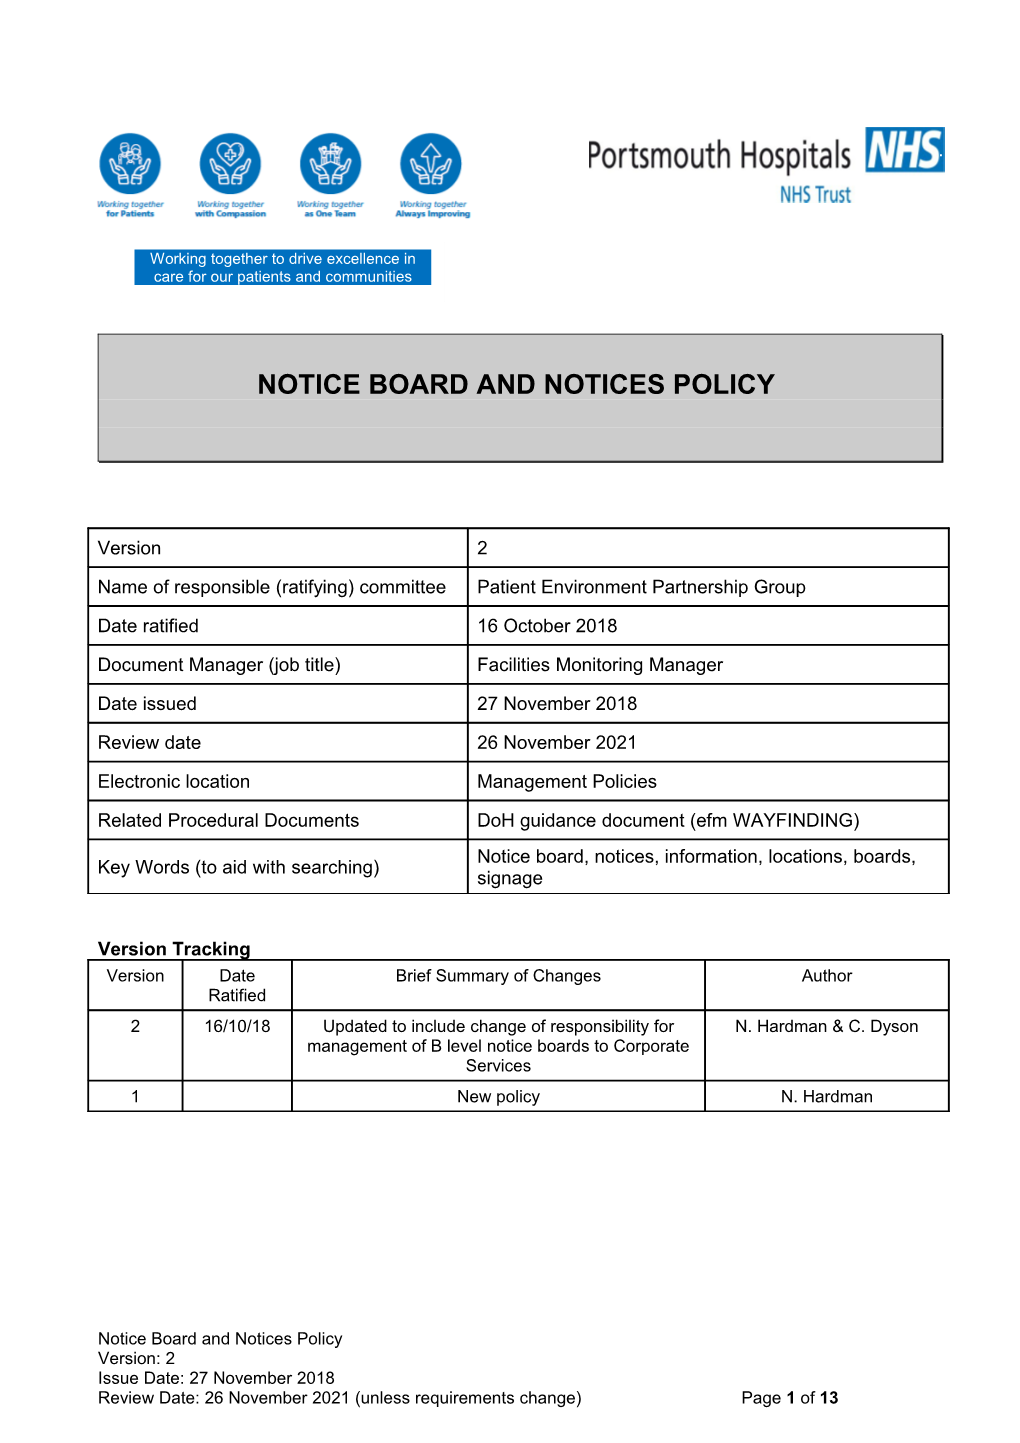 Notice Board and Notices Policy